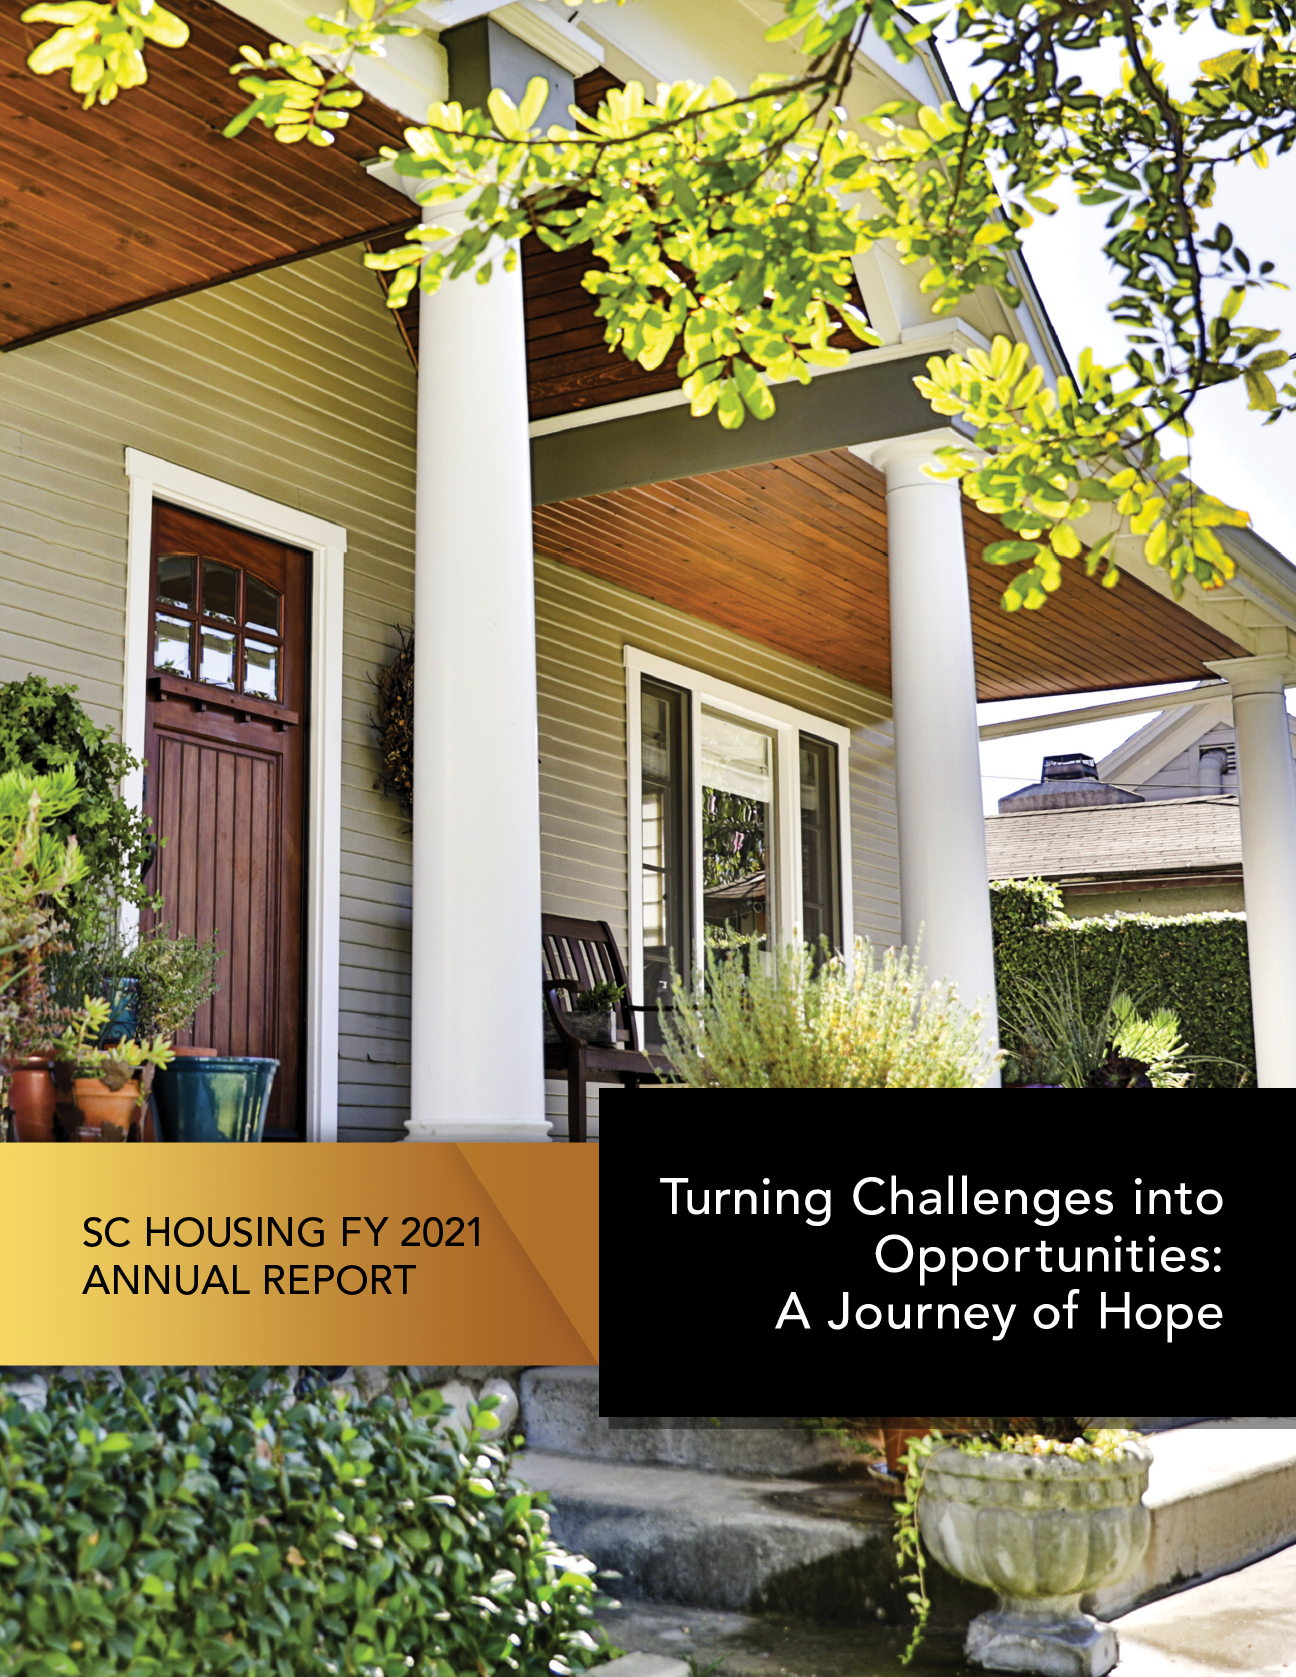 New Annual Report Highlights SC Housing Work in Challenging Year